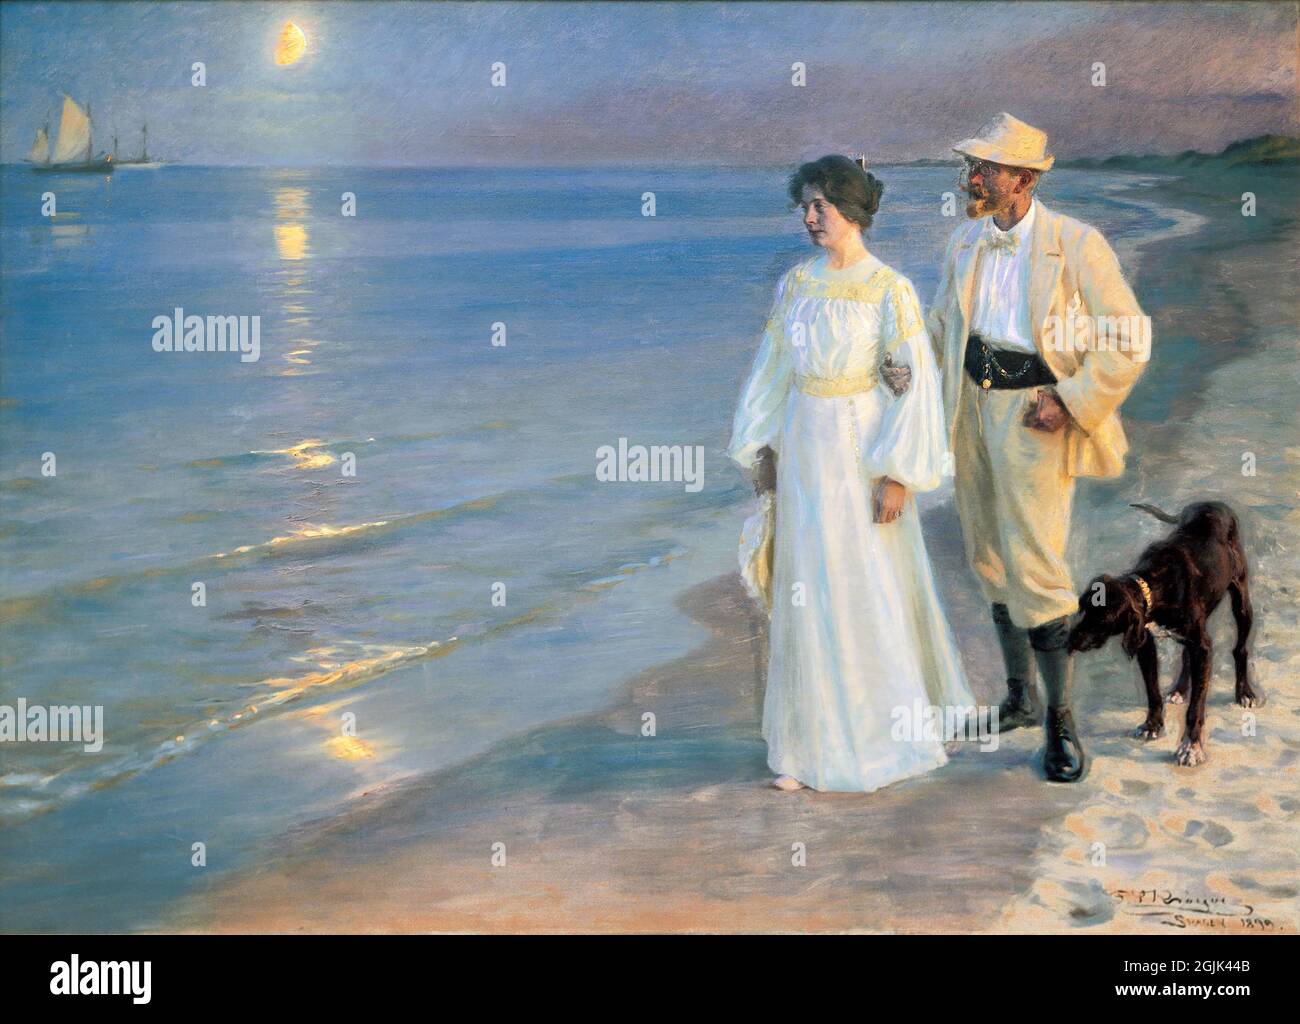 Summer evening on the beach at Skagen. The painter and his wife by Peder Severin Krøyer (1851-1909), 1899 Stock Photo